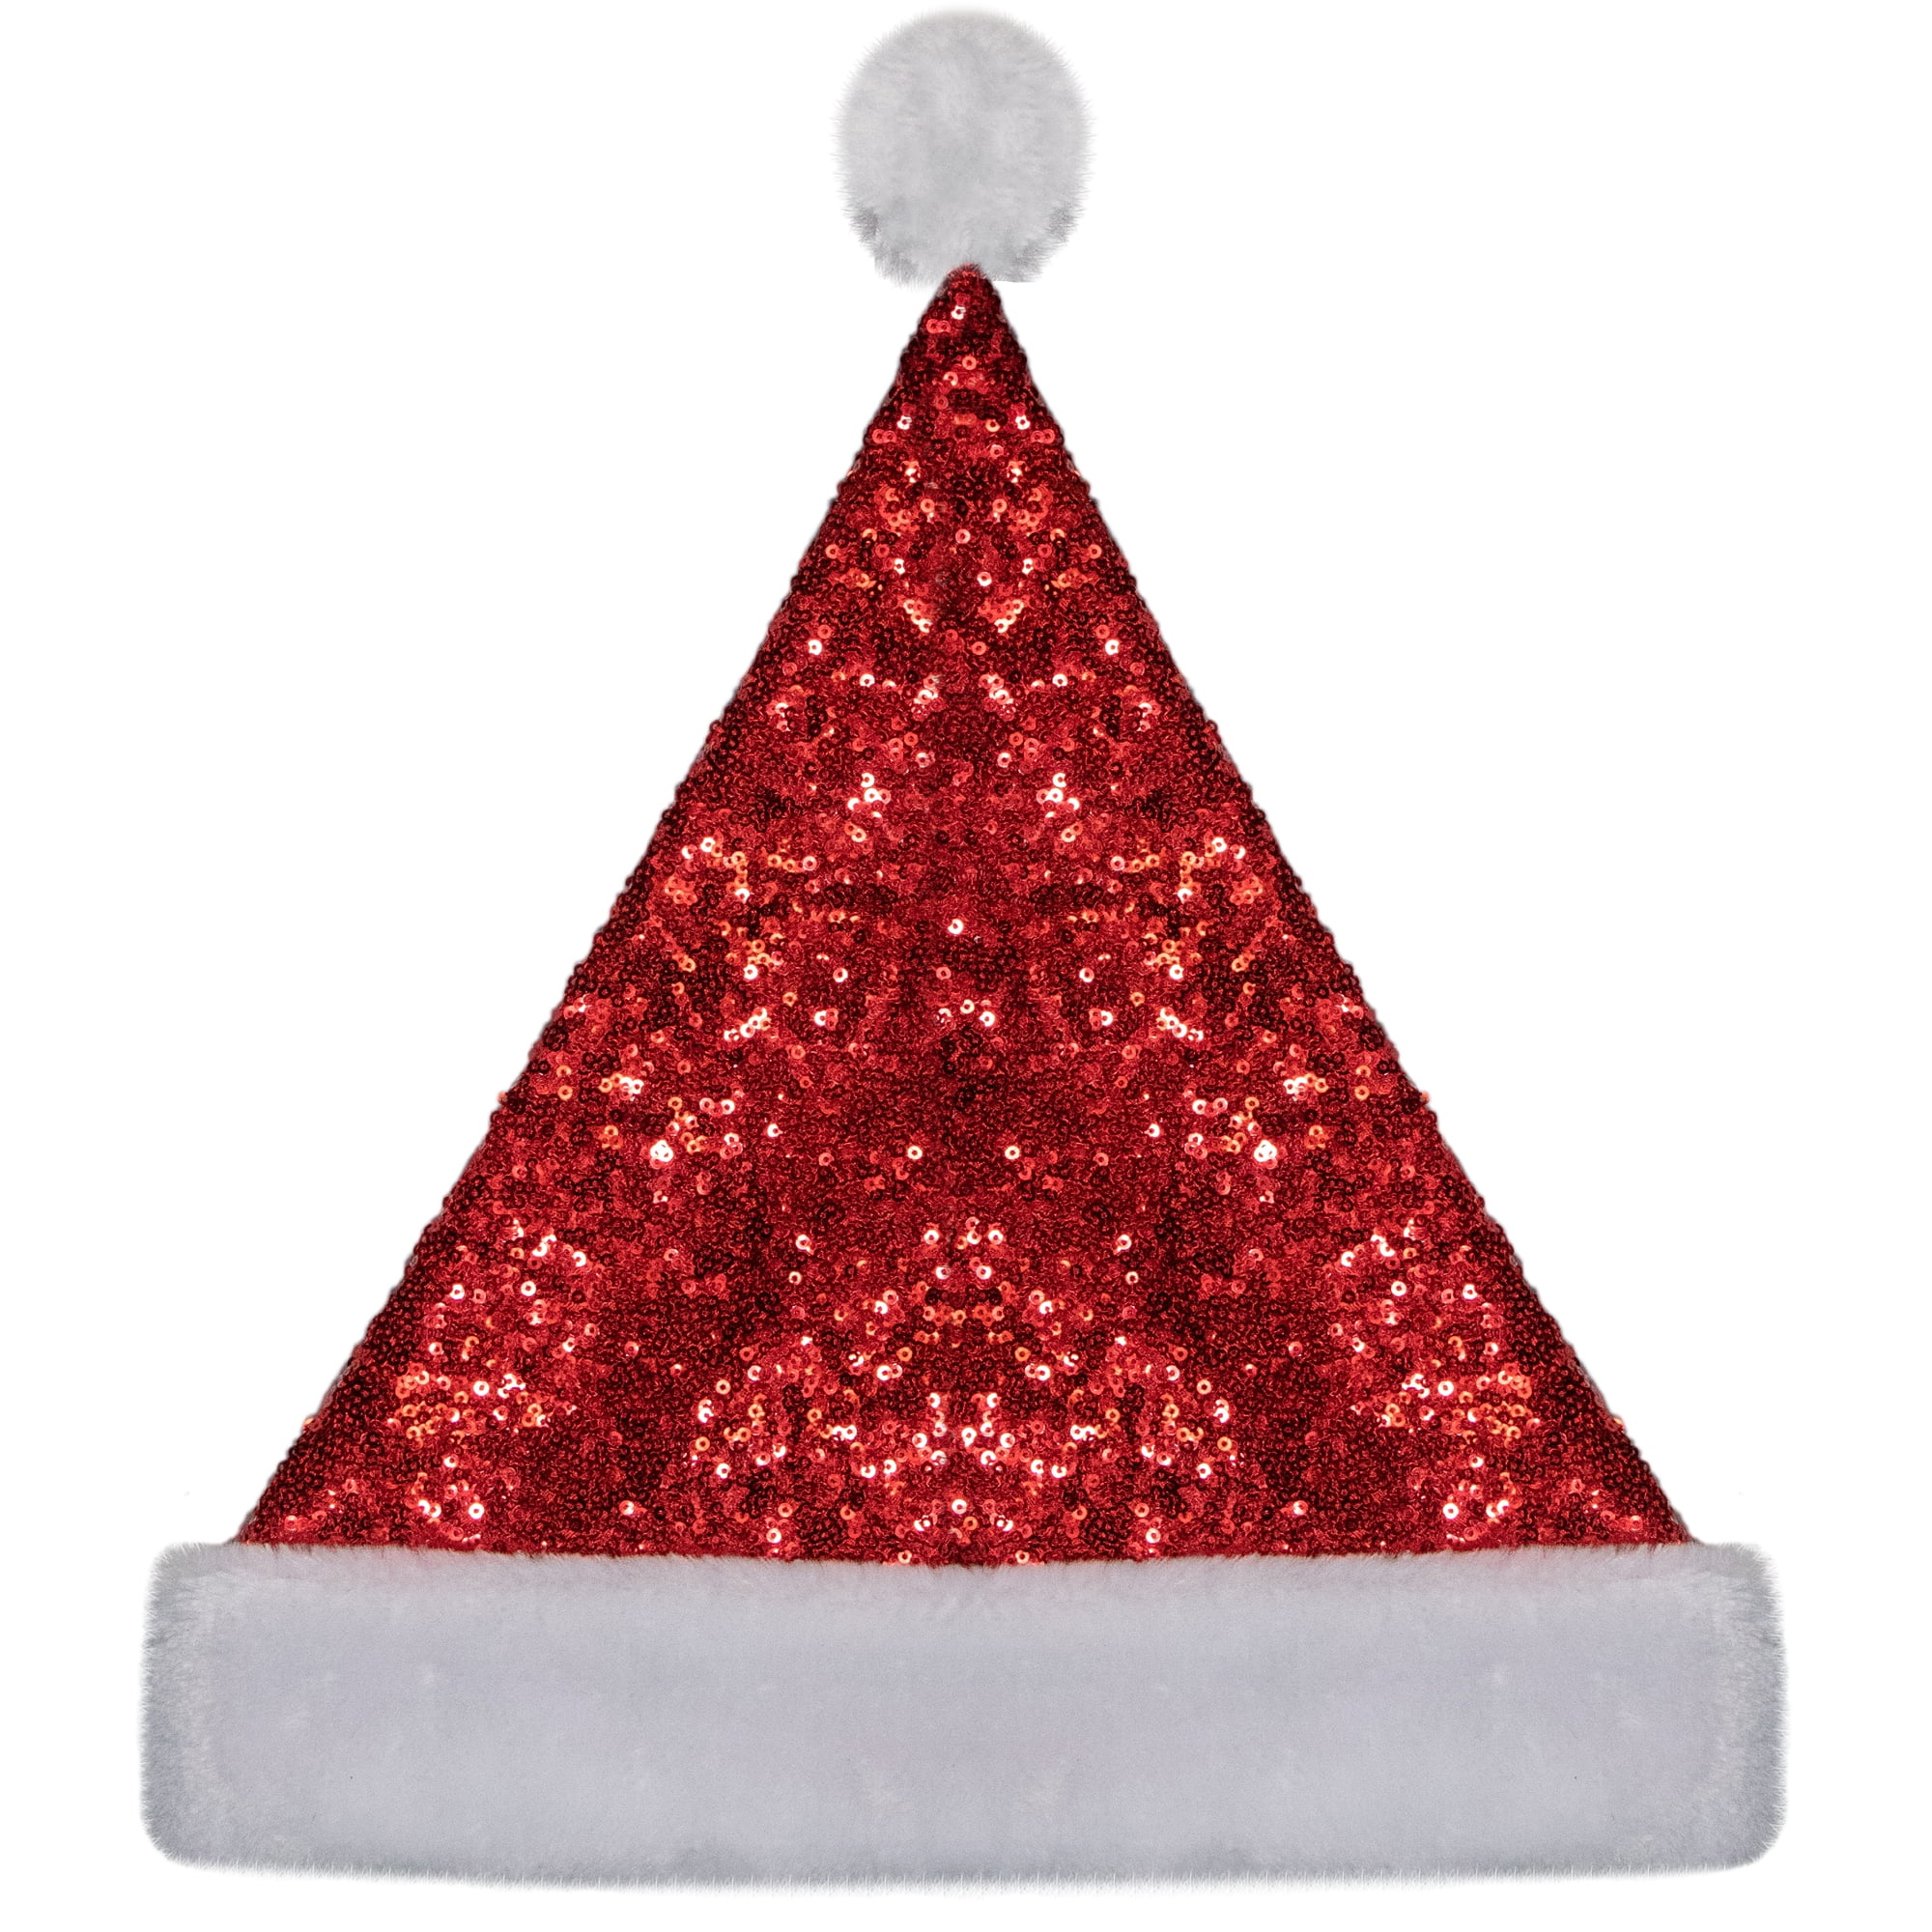 Adult Santa Hat Unisex Mens Womens Size M/L Christmas Clause Miss Claus Xmas NEW 